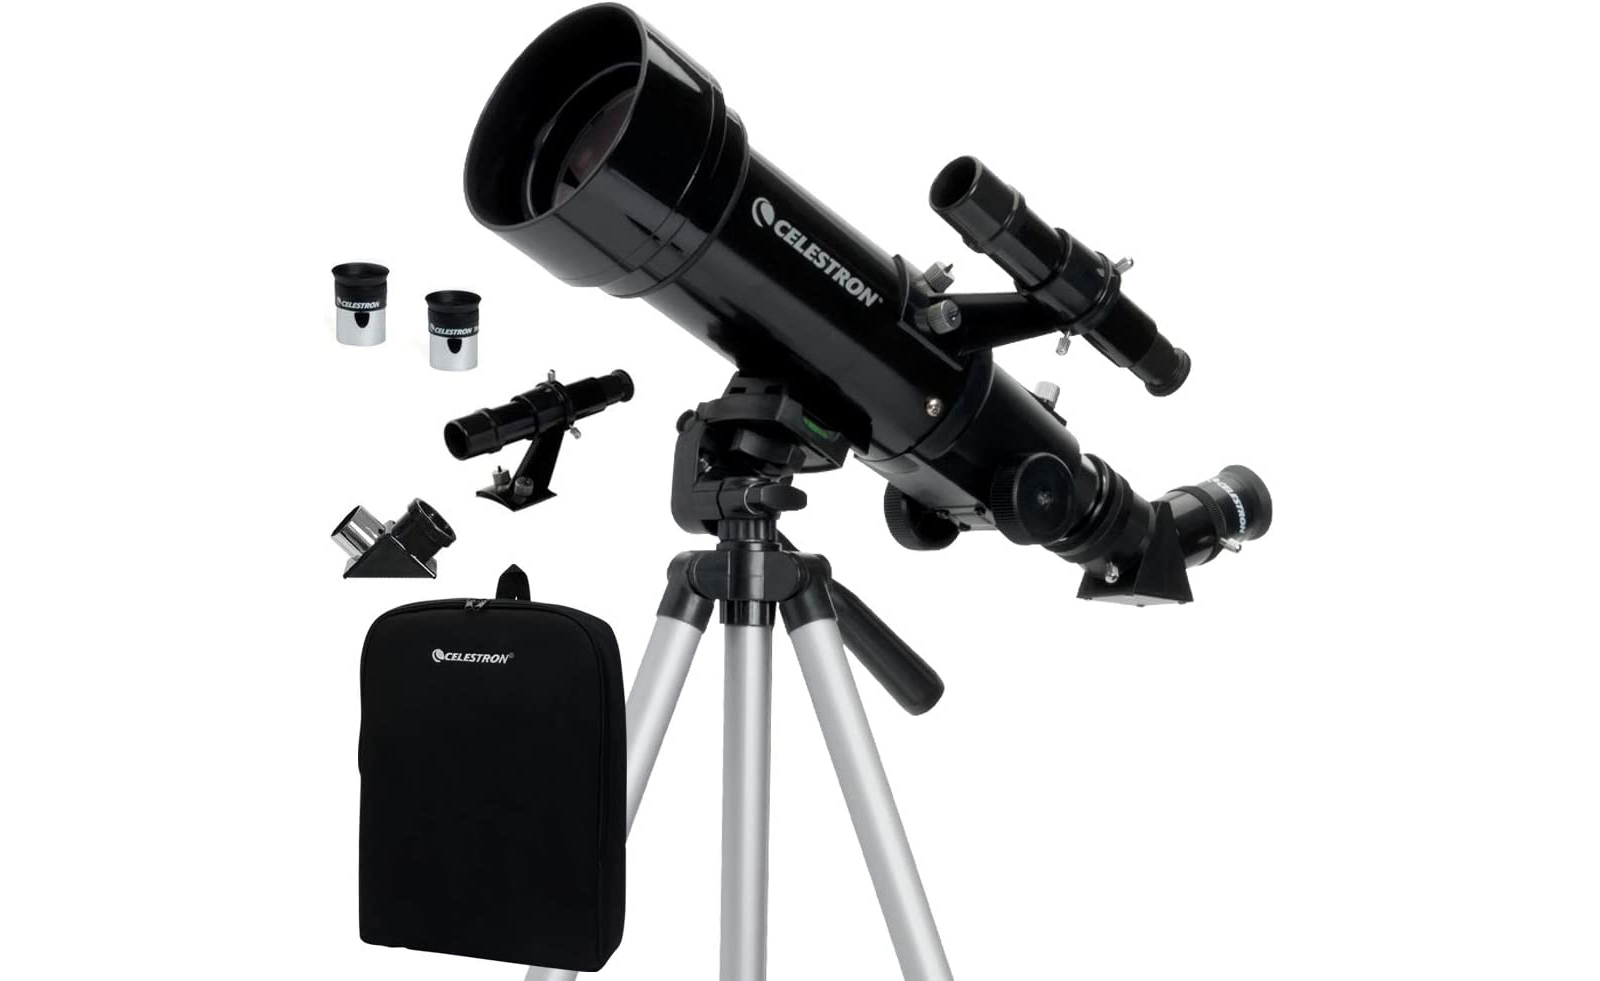 These Celestron beginner telescopes are over 30% off this holiday season